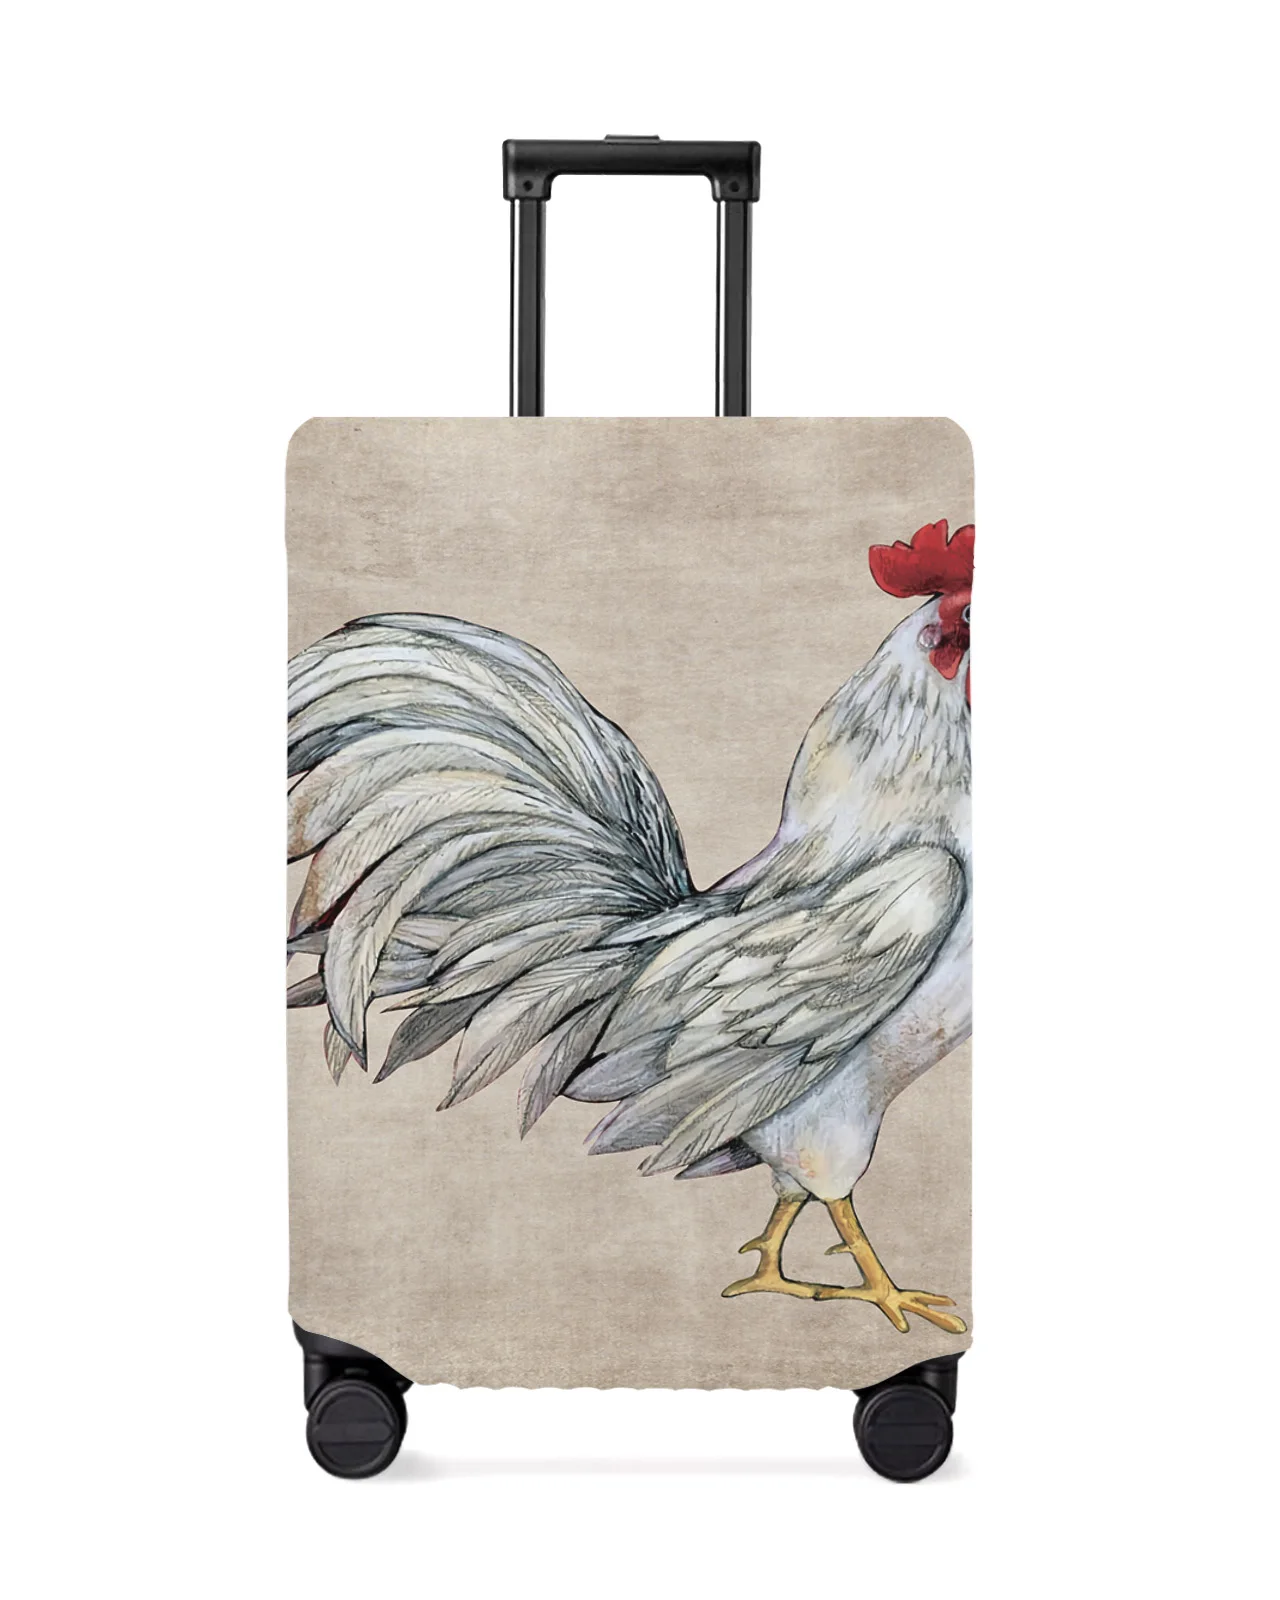 

Farm Animal Rooster Travel Luggage Cover Elastic Baggage Cover For 18-32 Inch Suitcase Case Dust Cover Travel Accessories